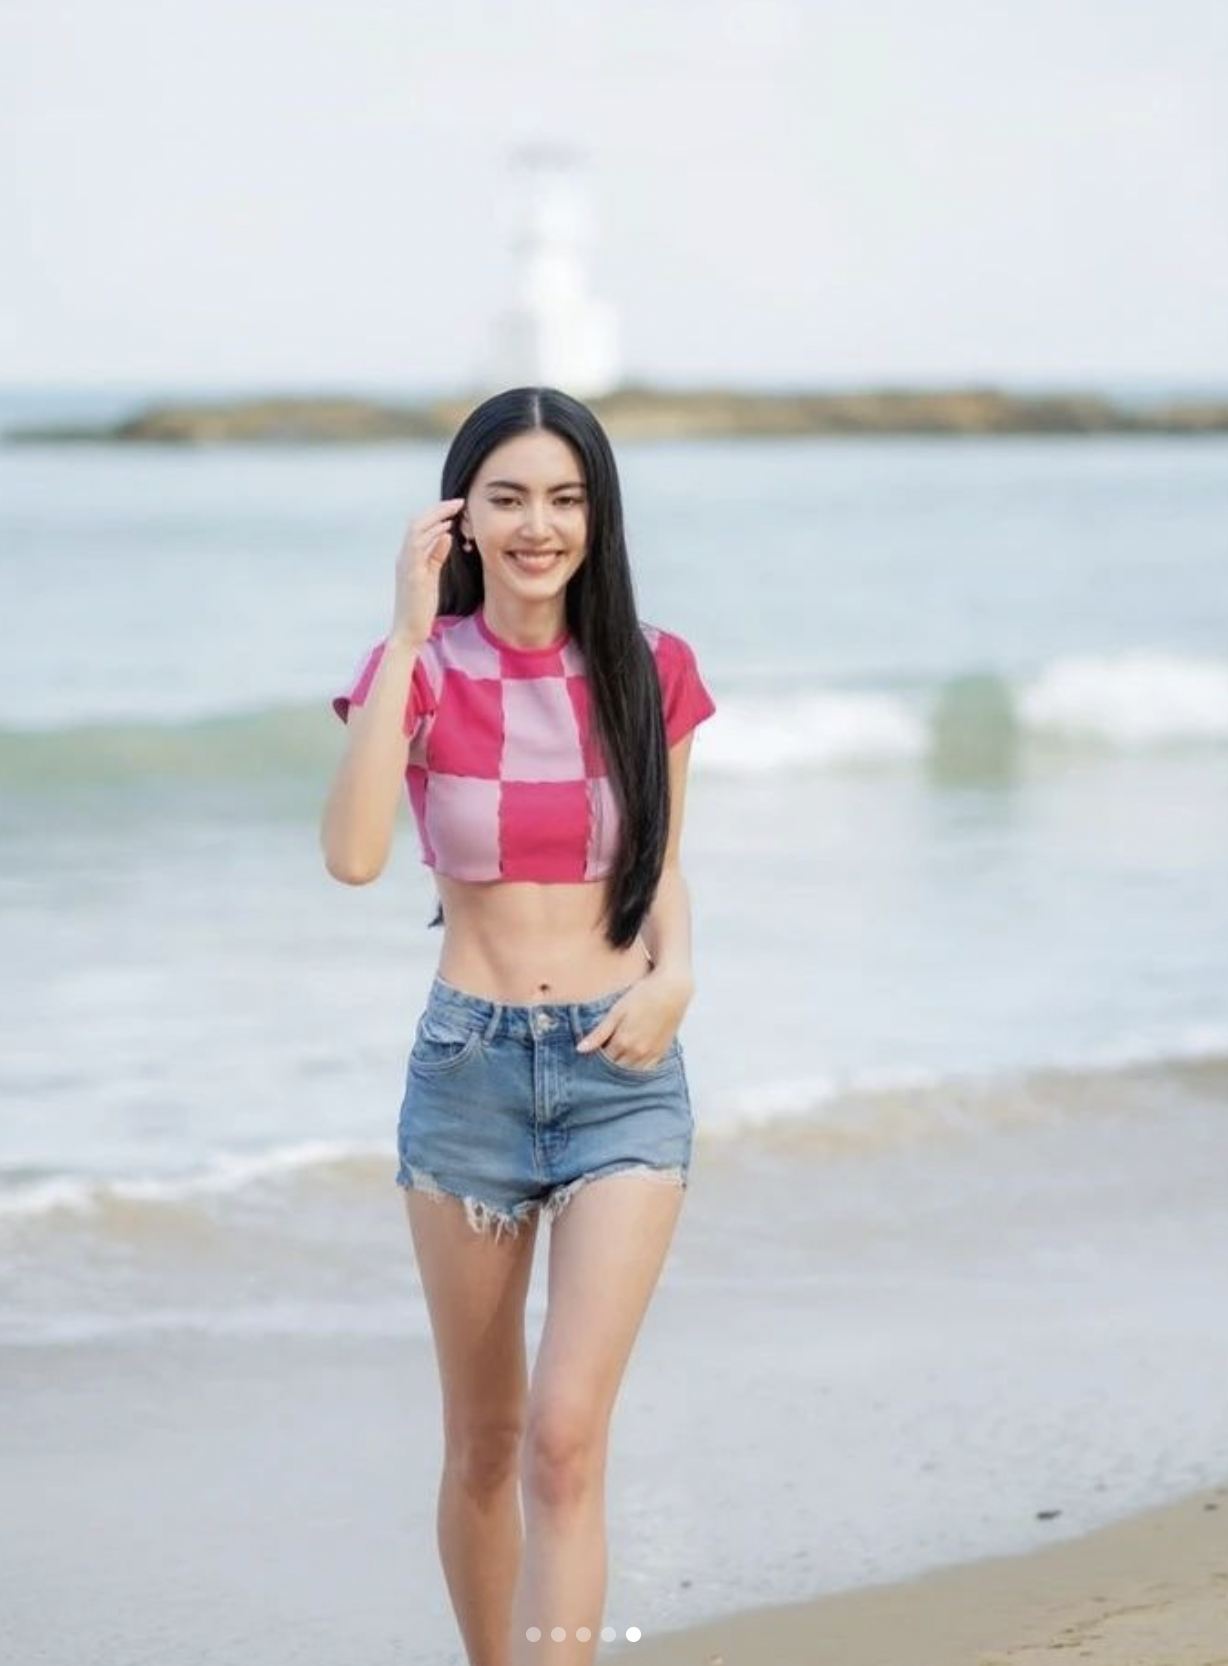 Conspiracy to cut and cut Jennie (Black Pink), but the most beautiful female ghost in Thailand revealed her whole body with bones and bones - Photo 9.